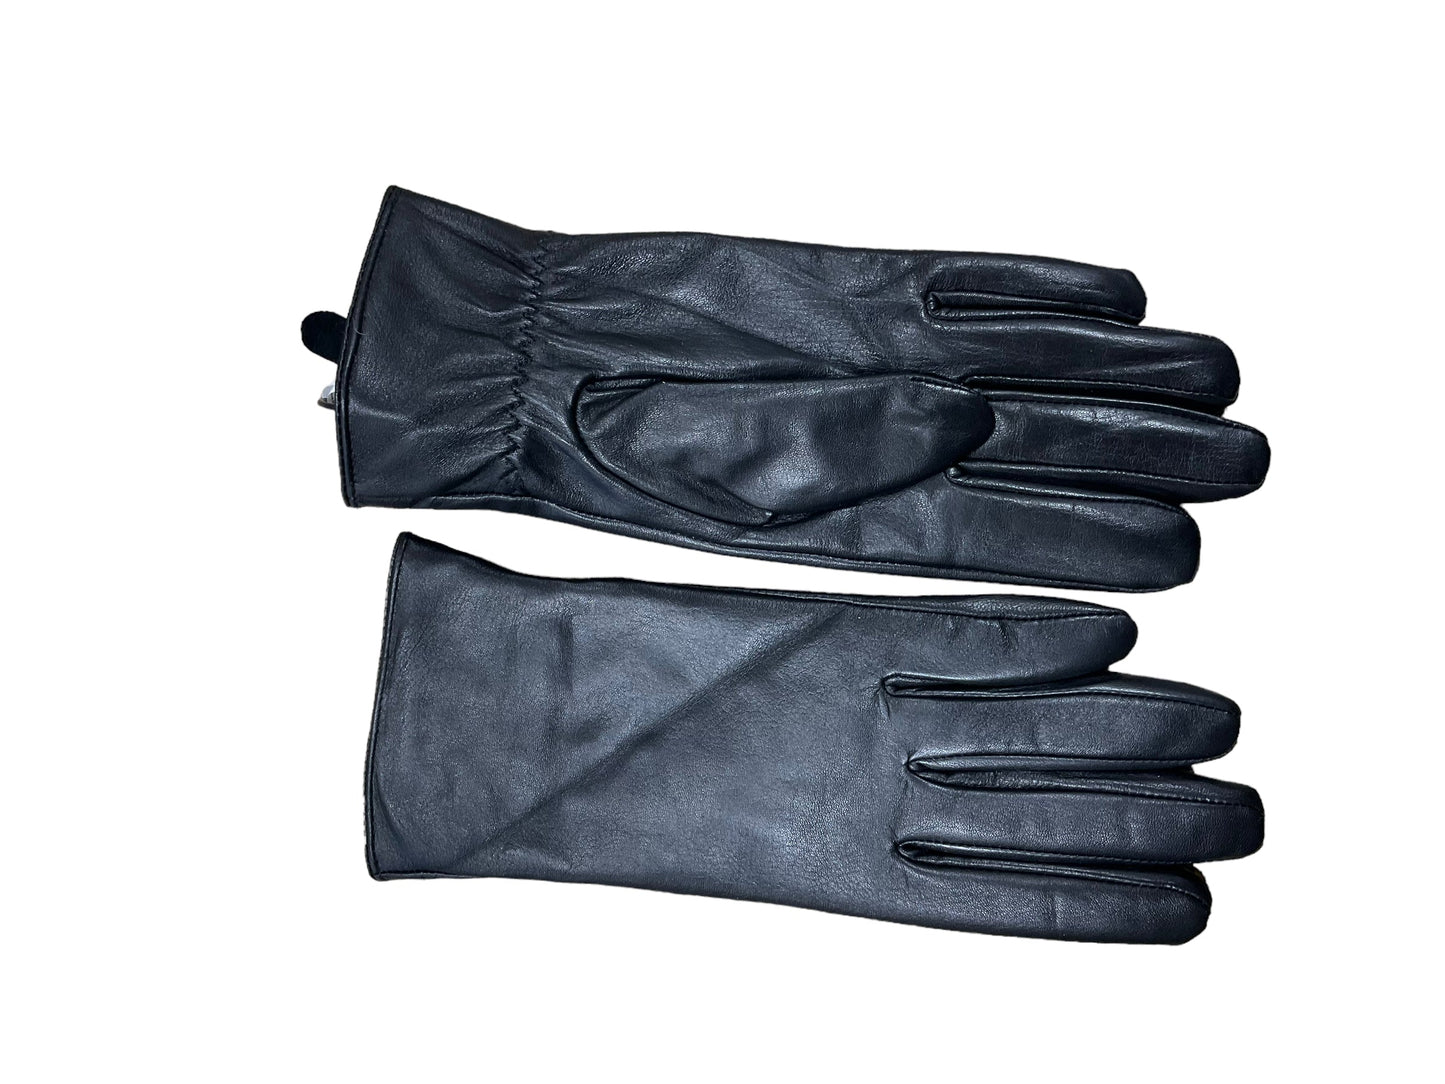 Gloves Leather By Clothes Mentor